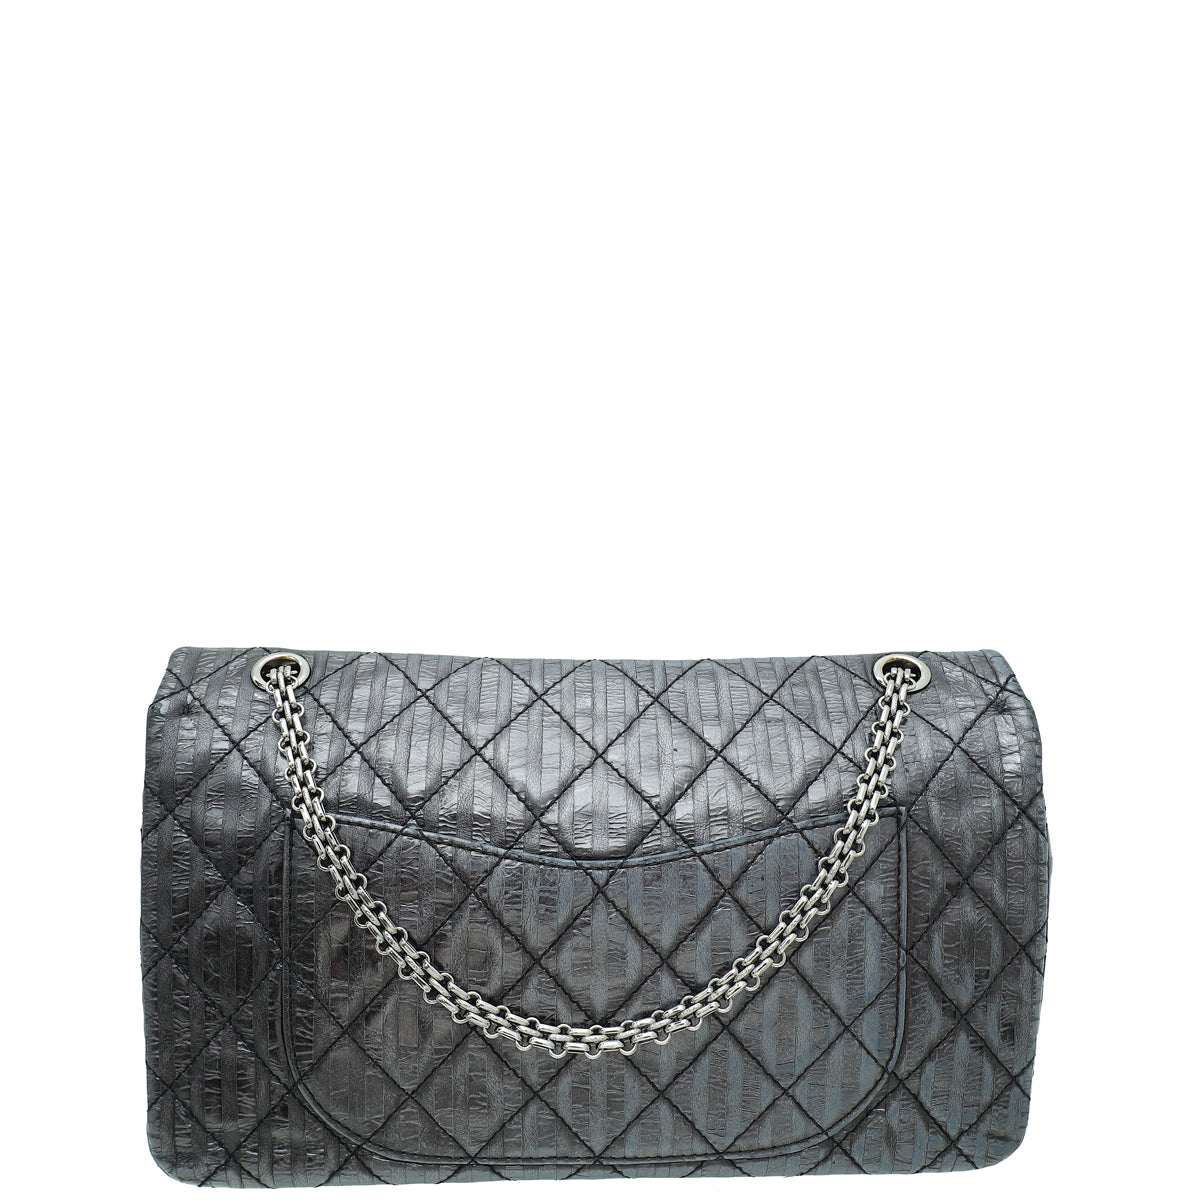 Chanel Dark Grey Reissue 2.55 Stripped Double Flap 227 Bag – The Closet